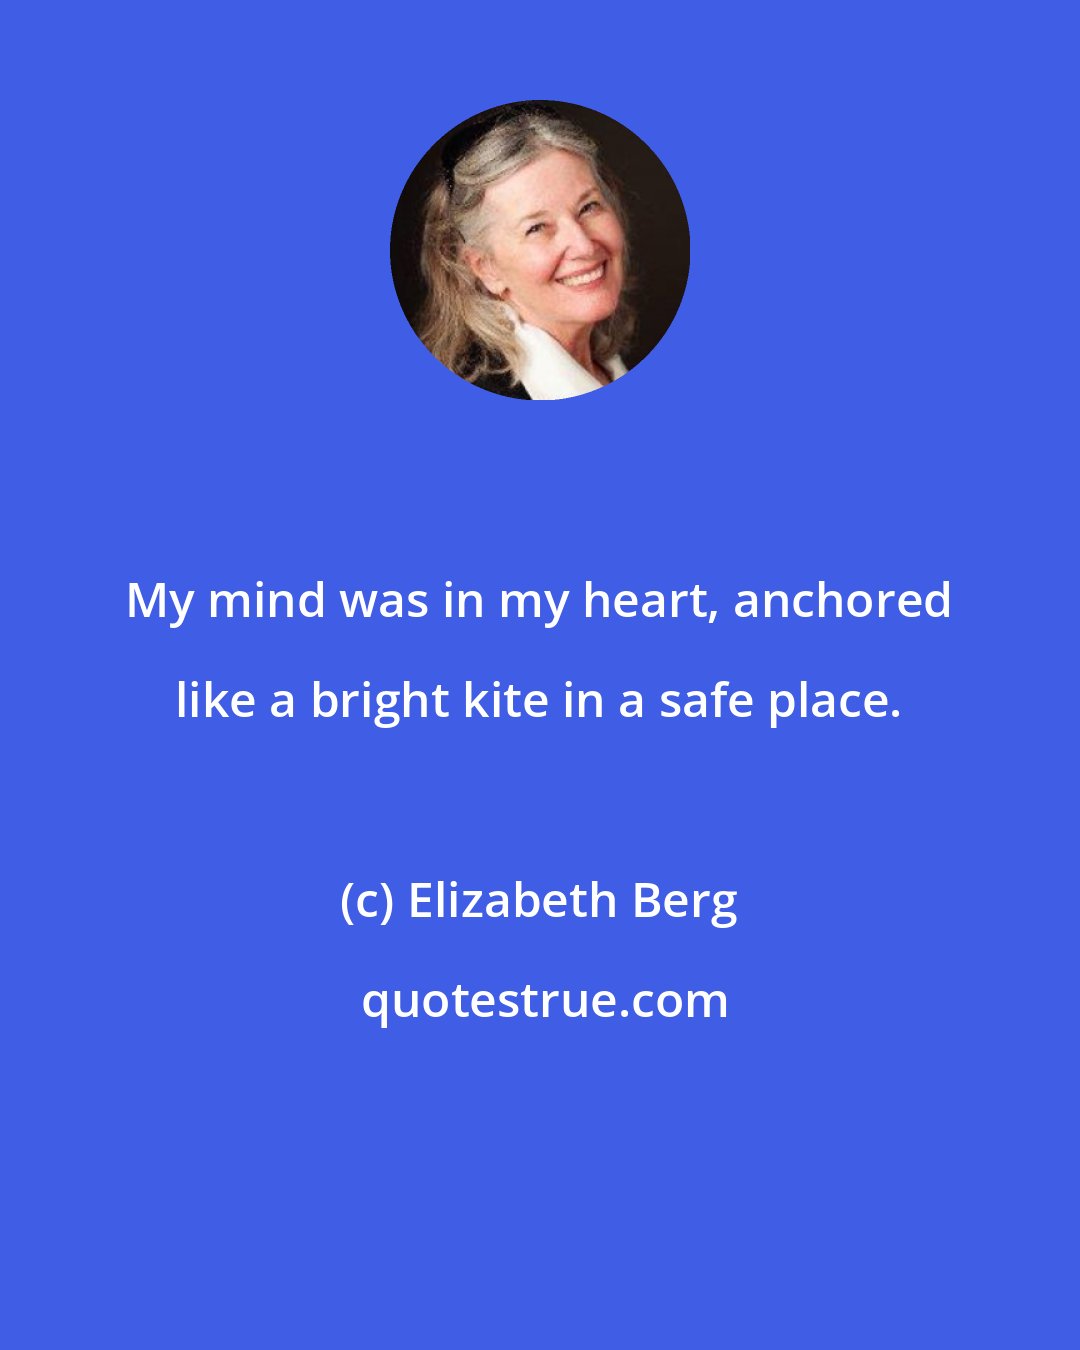 Elizabeth Berg: My mind was in my heart, anchored like a bright kite in a safe place.